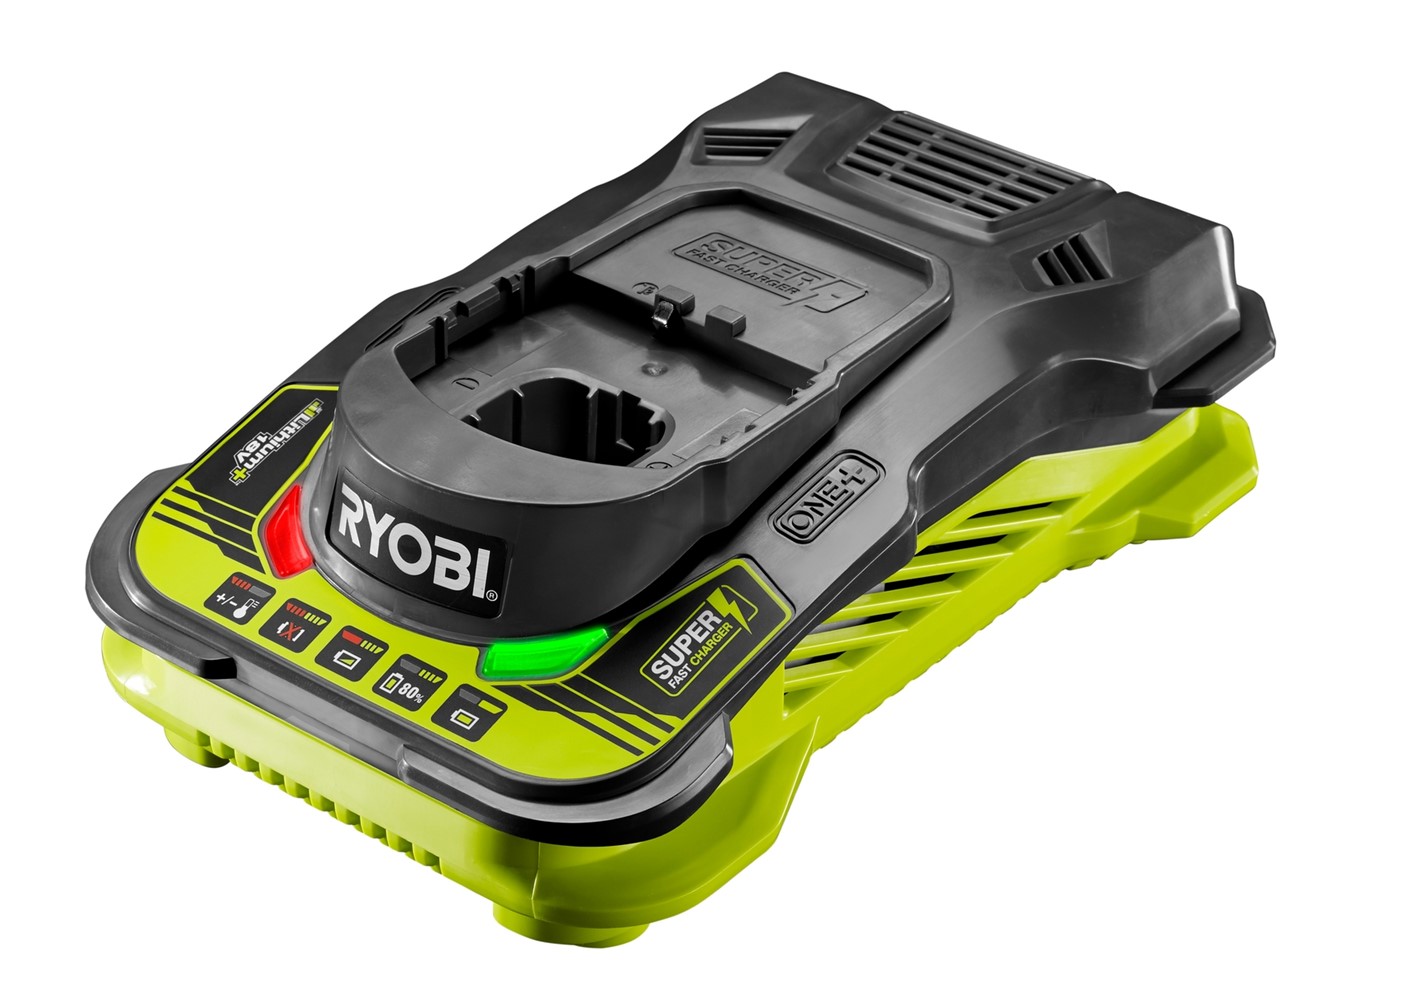 Chargeur super rapide lithium-ion 18V ONE+ - RYOBI